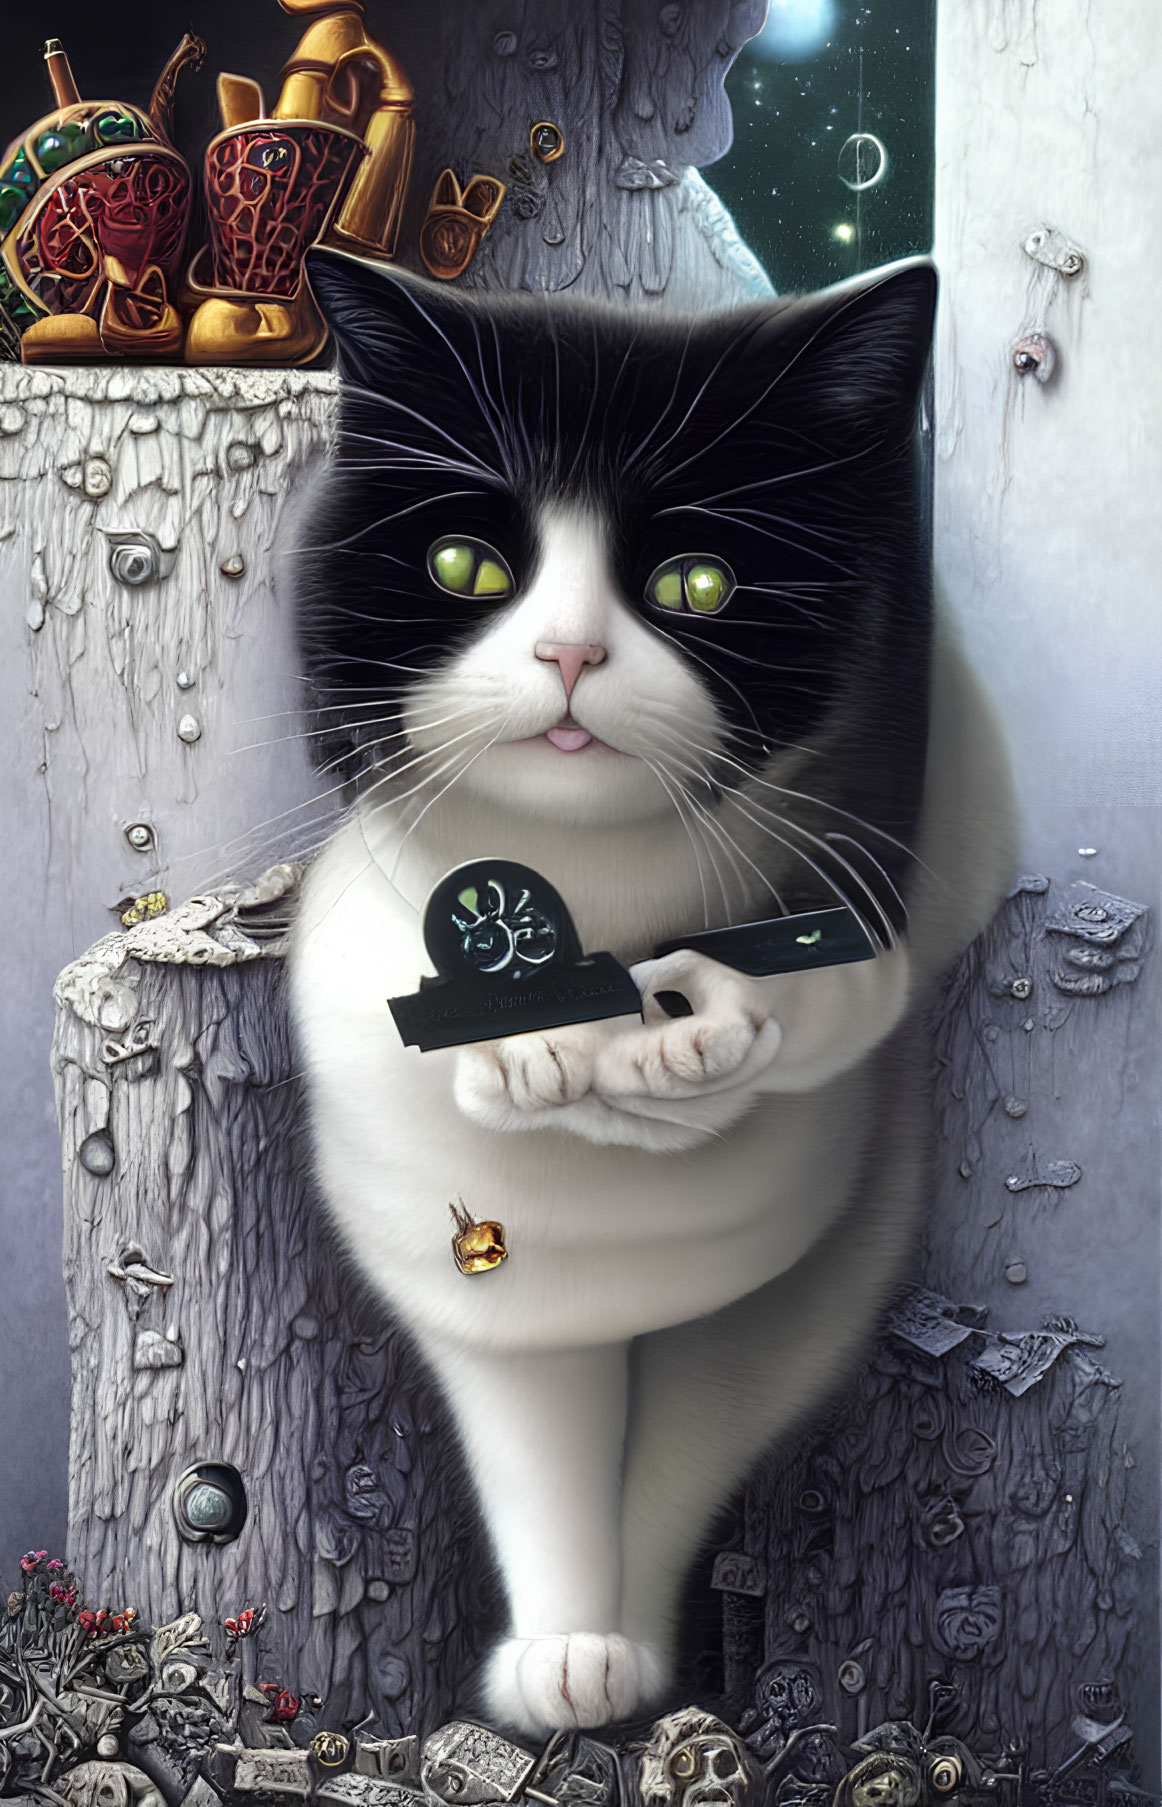 Whimsical black and white cat with tarot card in cosmic setting